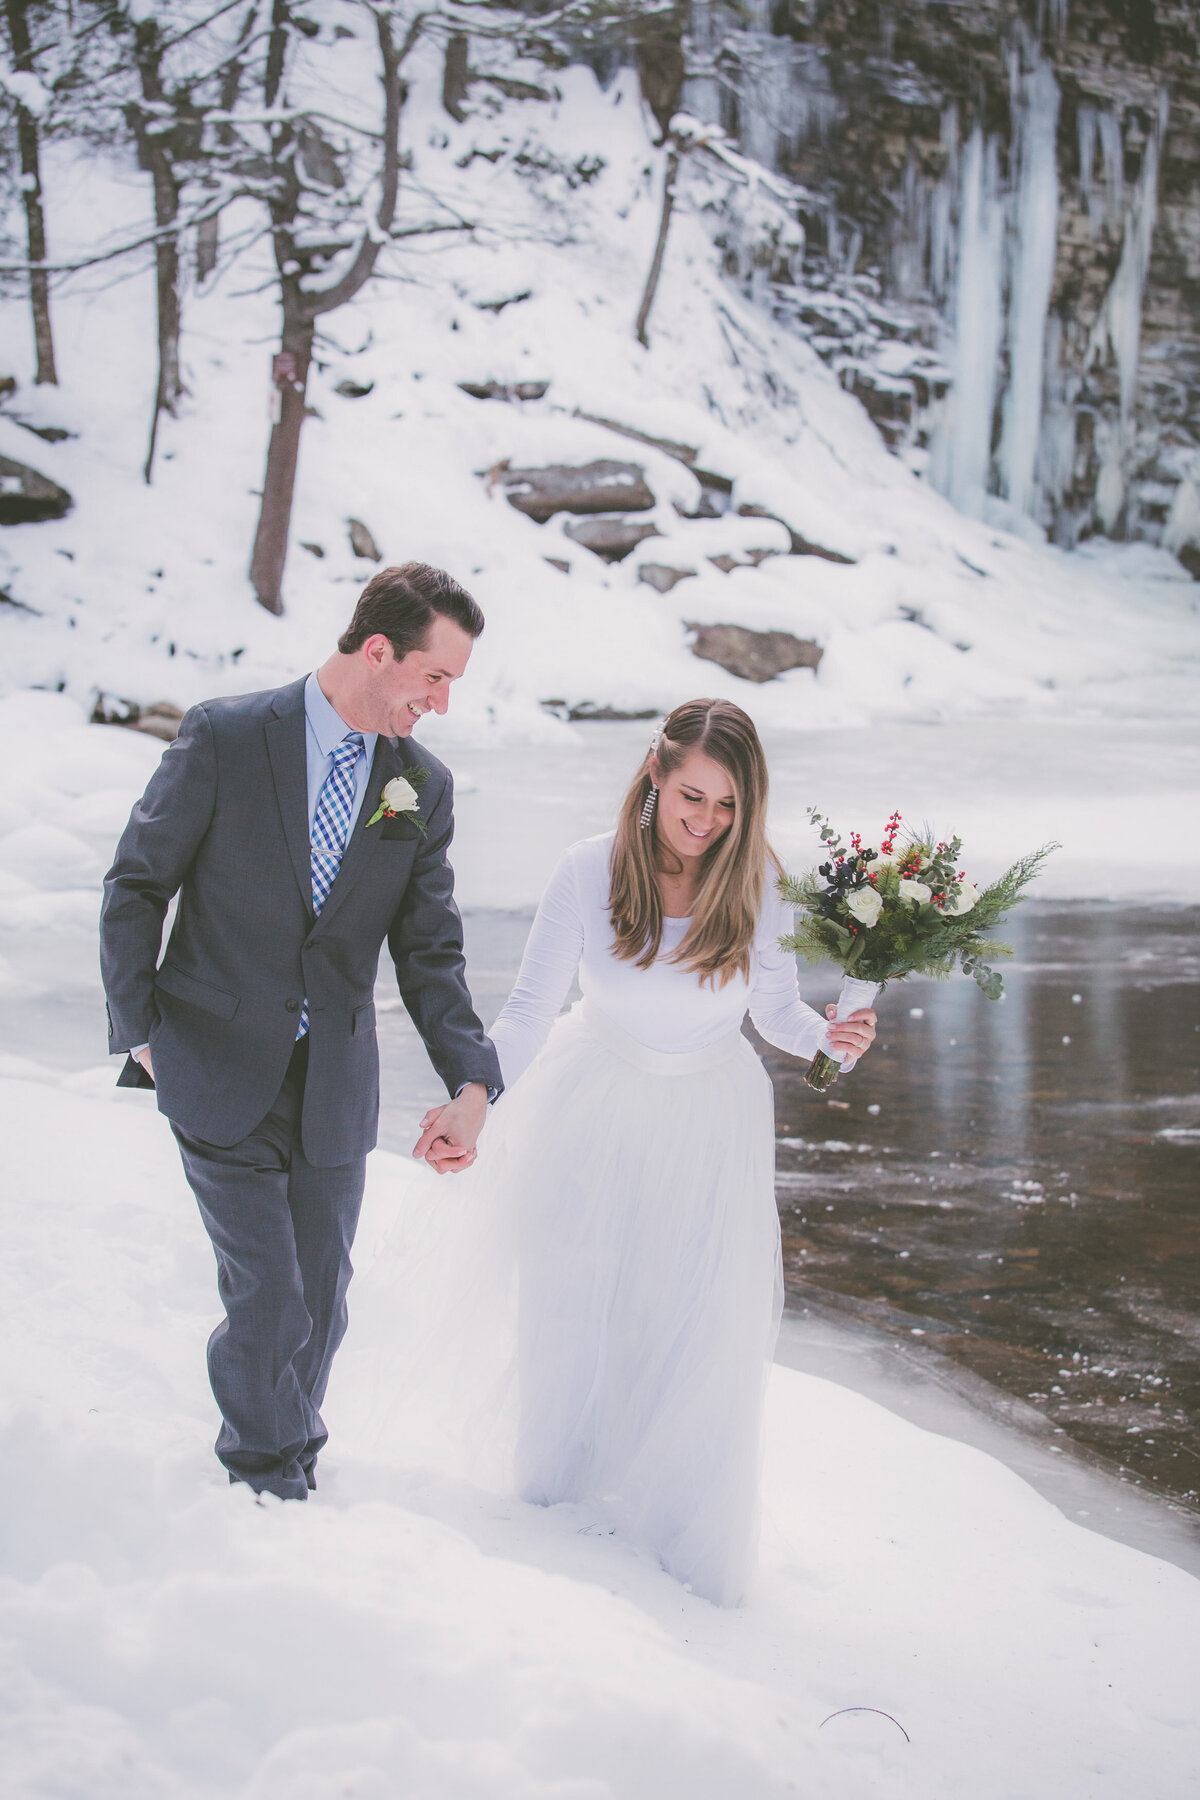 A perfect snowy adventure during their elopement.